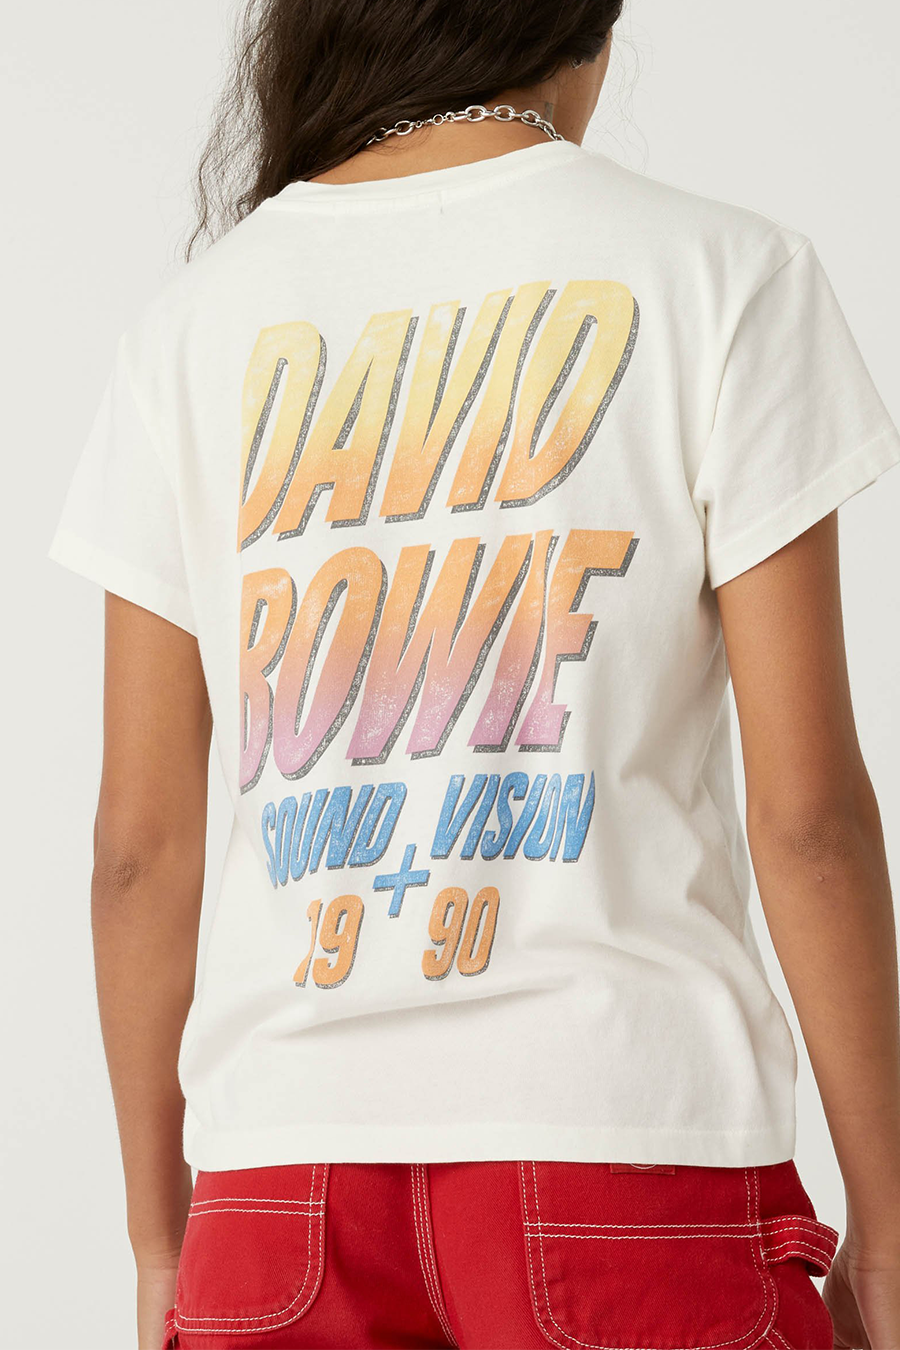 David Bowie Sound Vision Tee | Vintage White - Main Image Number 2 of 2